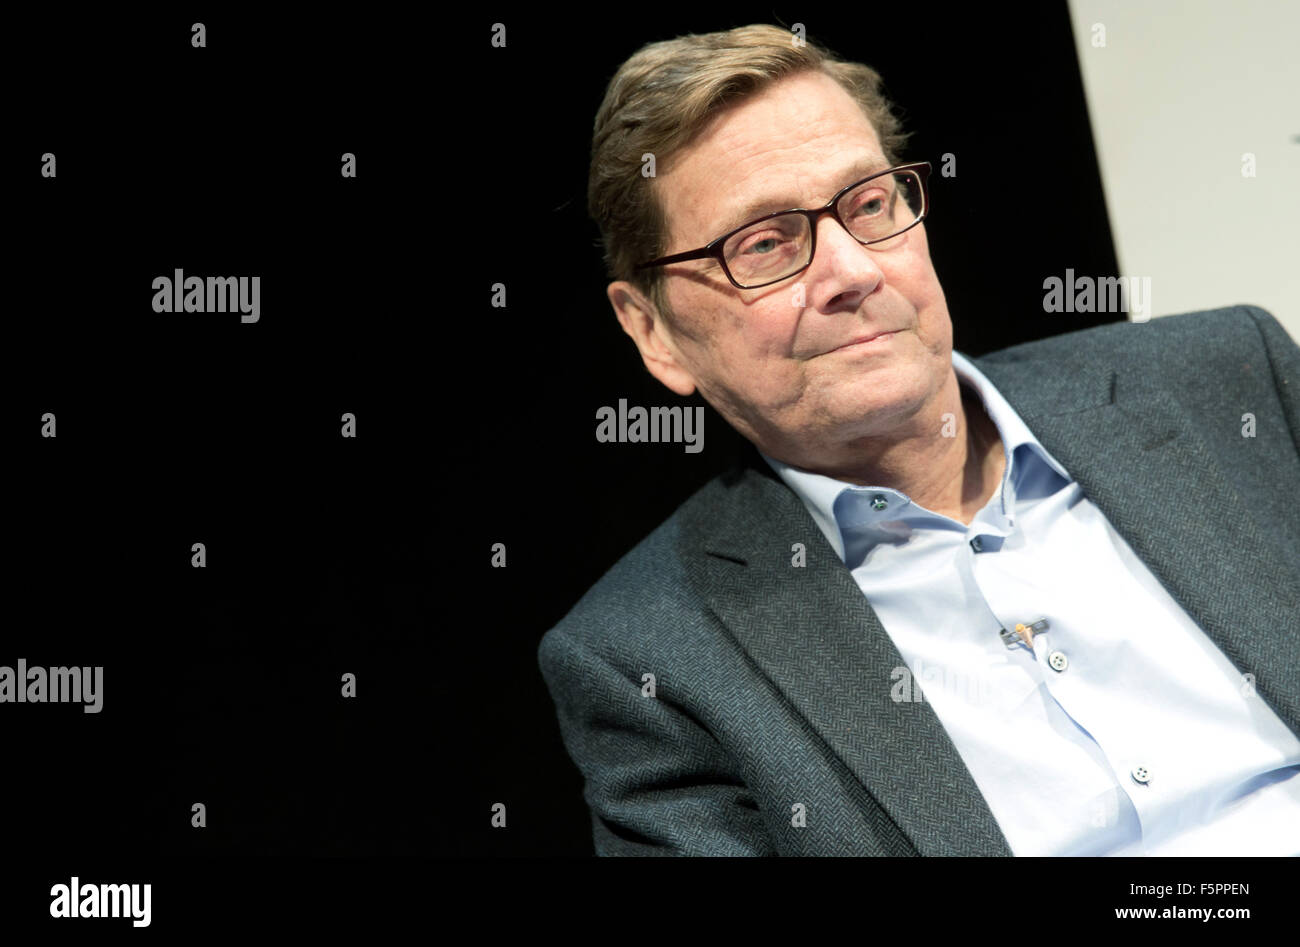 Berlin, Germany. 8th Nov, 2015. Former German foreign minister Guido Westerwelle (FDP) at a the release of his new book "Zwischen zwei Leben. Von Liebe, Tod und Zuversicht" (lit. Between two lives. On love, death and trust) at the Berliner Ensemble in Berlin, Germany, 8 November 2015. PHOTO: JOERG CARSTENSEN/DPA/Alamy Live News Stock Photo